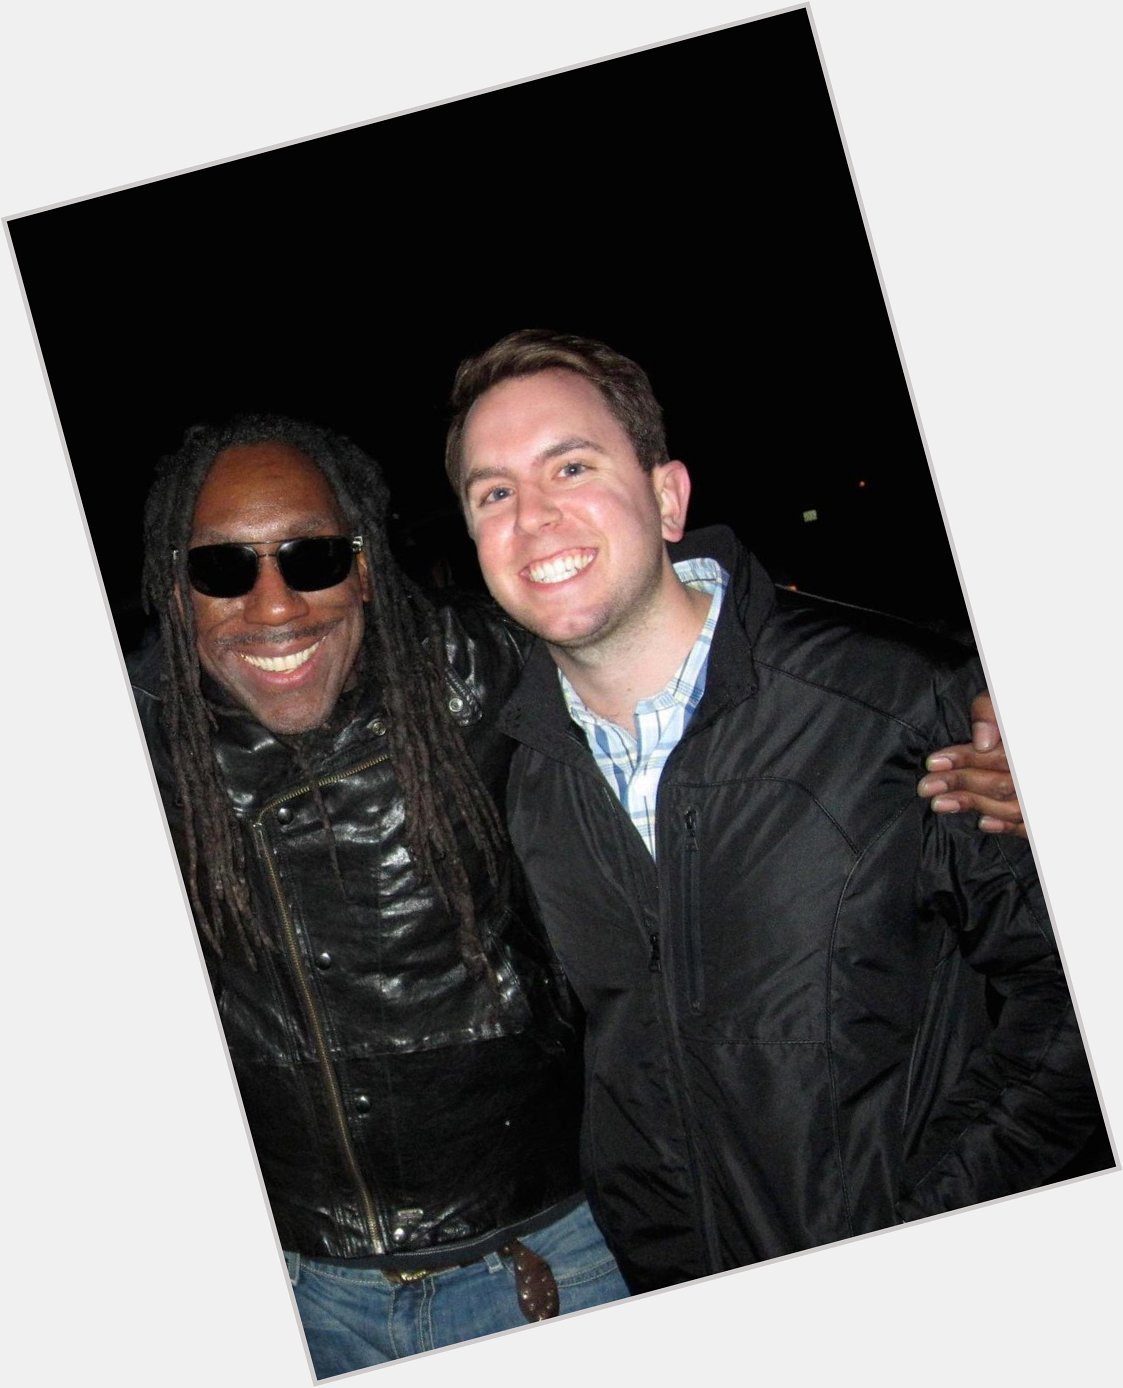 A Very Happy Birthday to my brother Boyd Tinsley on the Violin!  